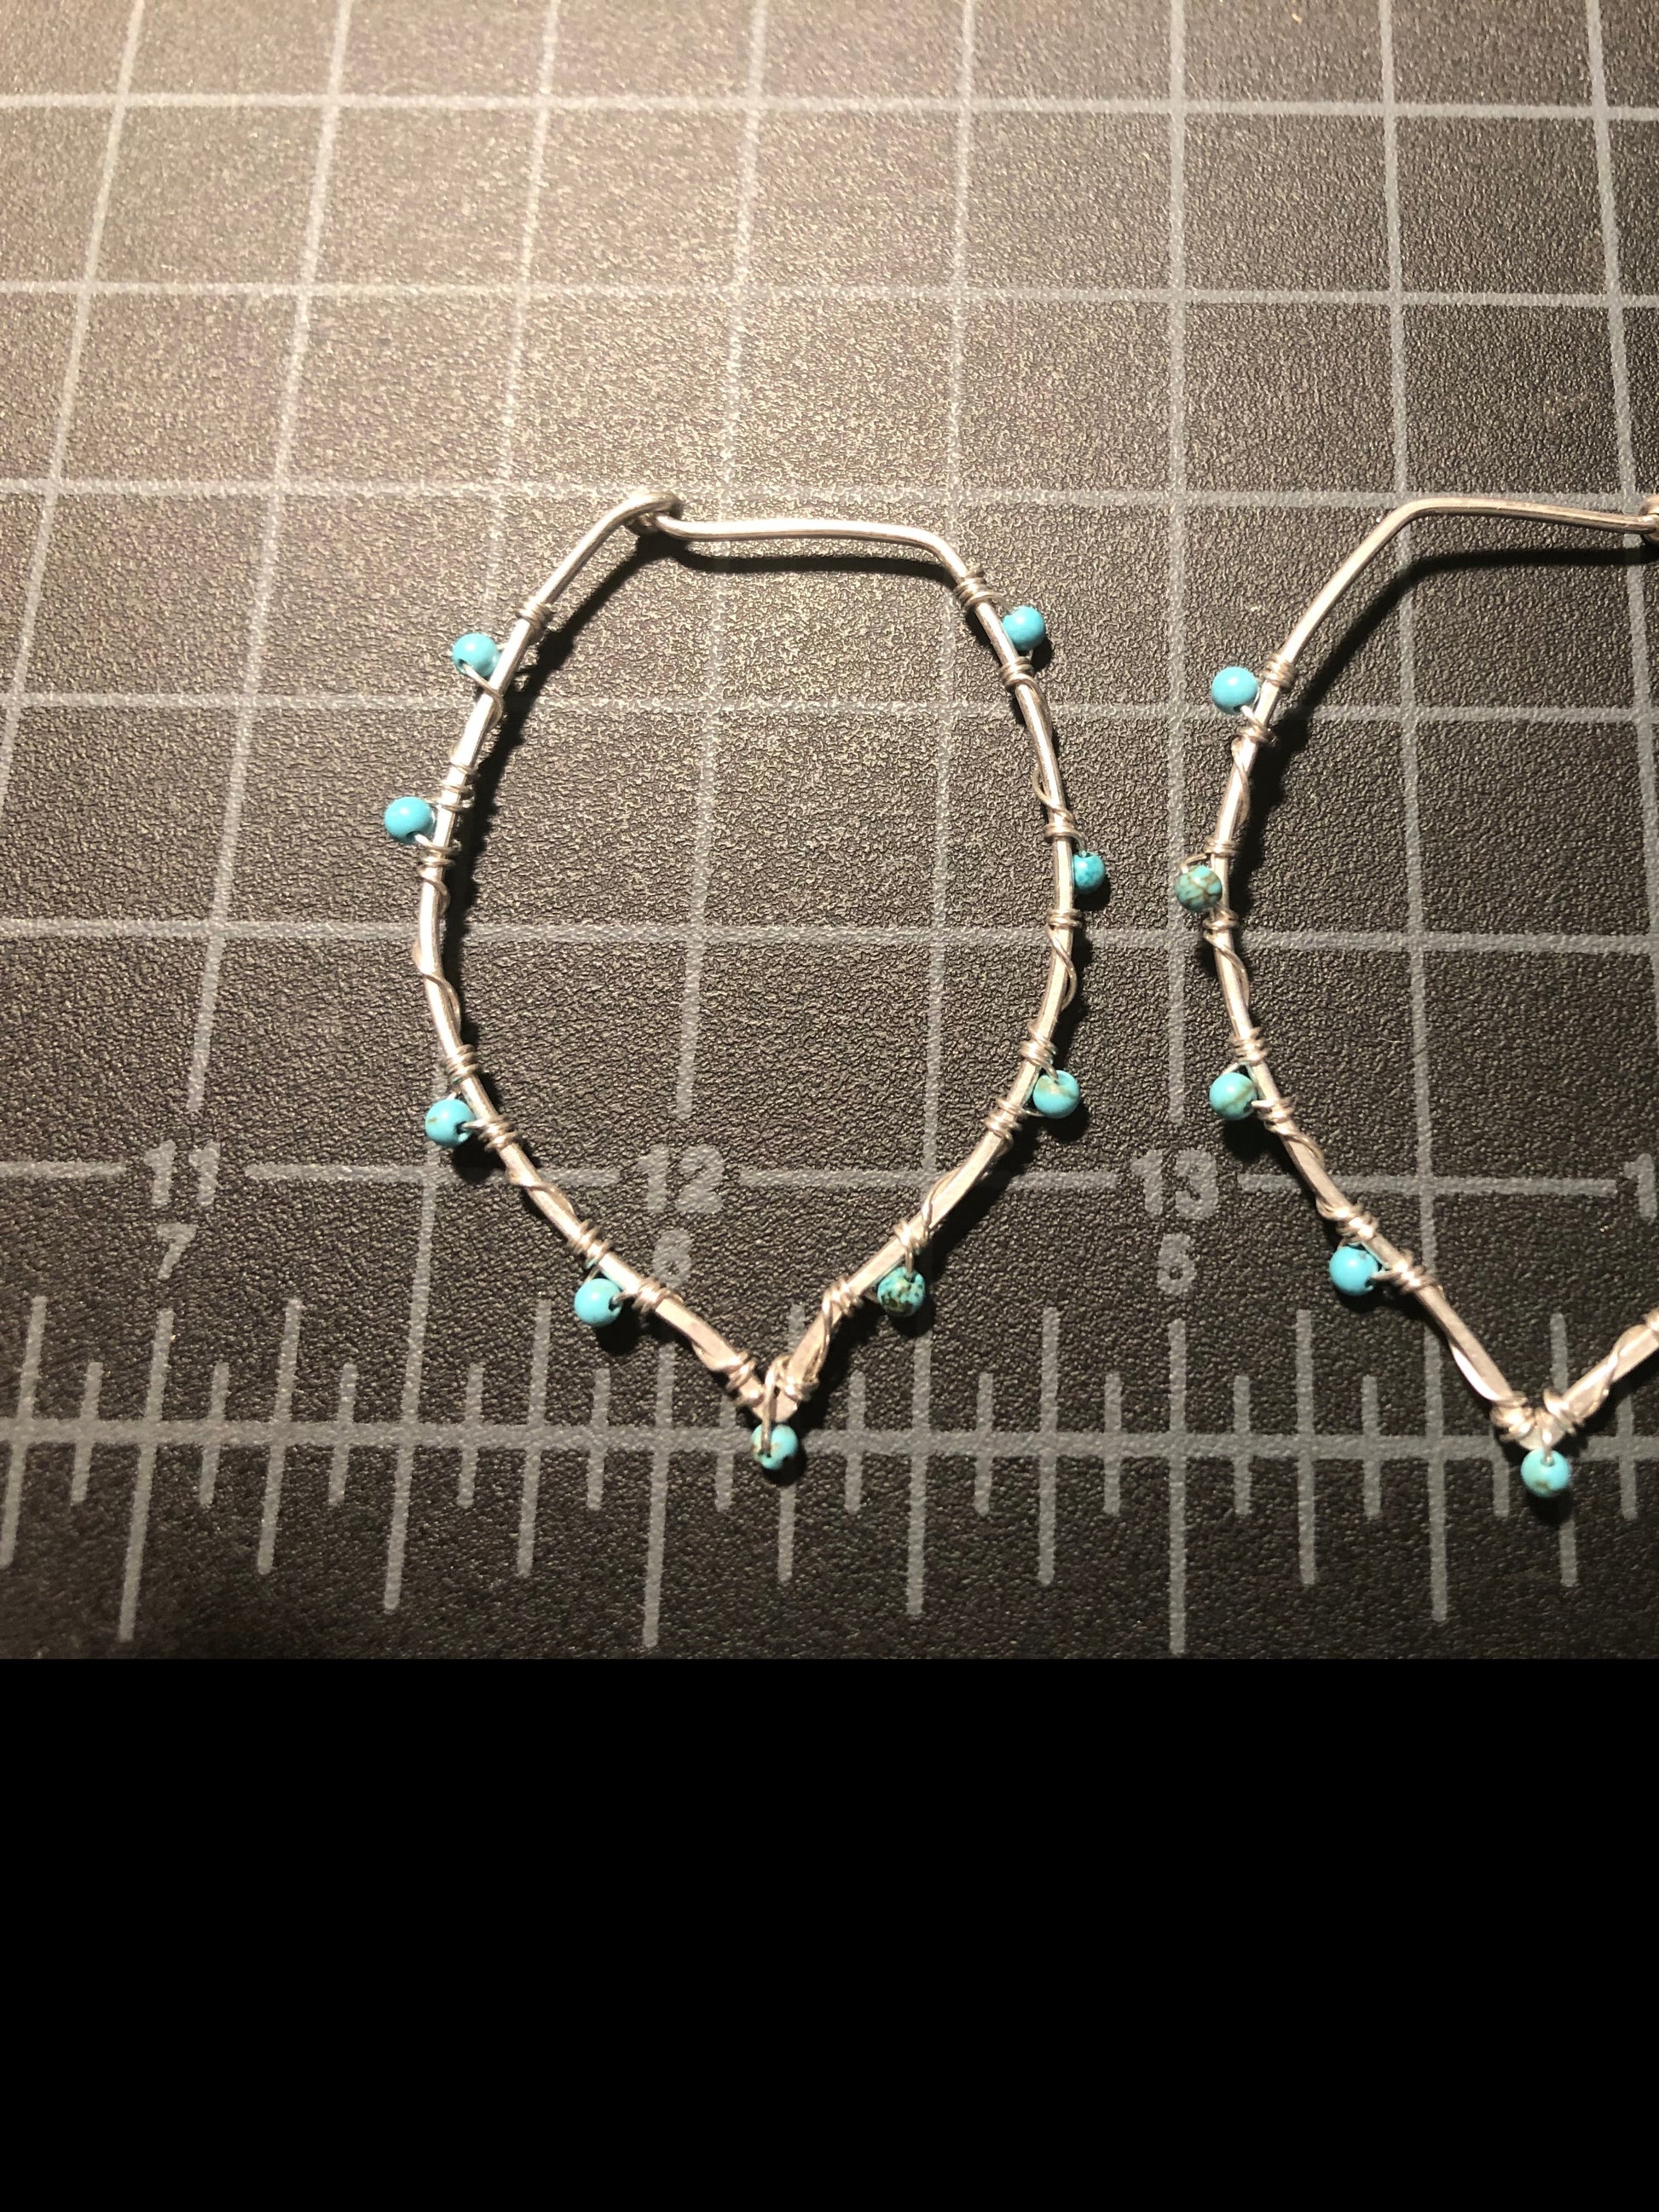 Silver leaf shape hoop earrings on a black mat with grid for measuring 